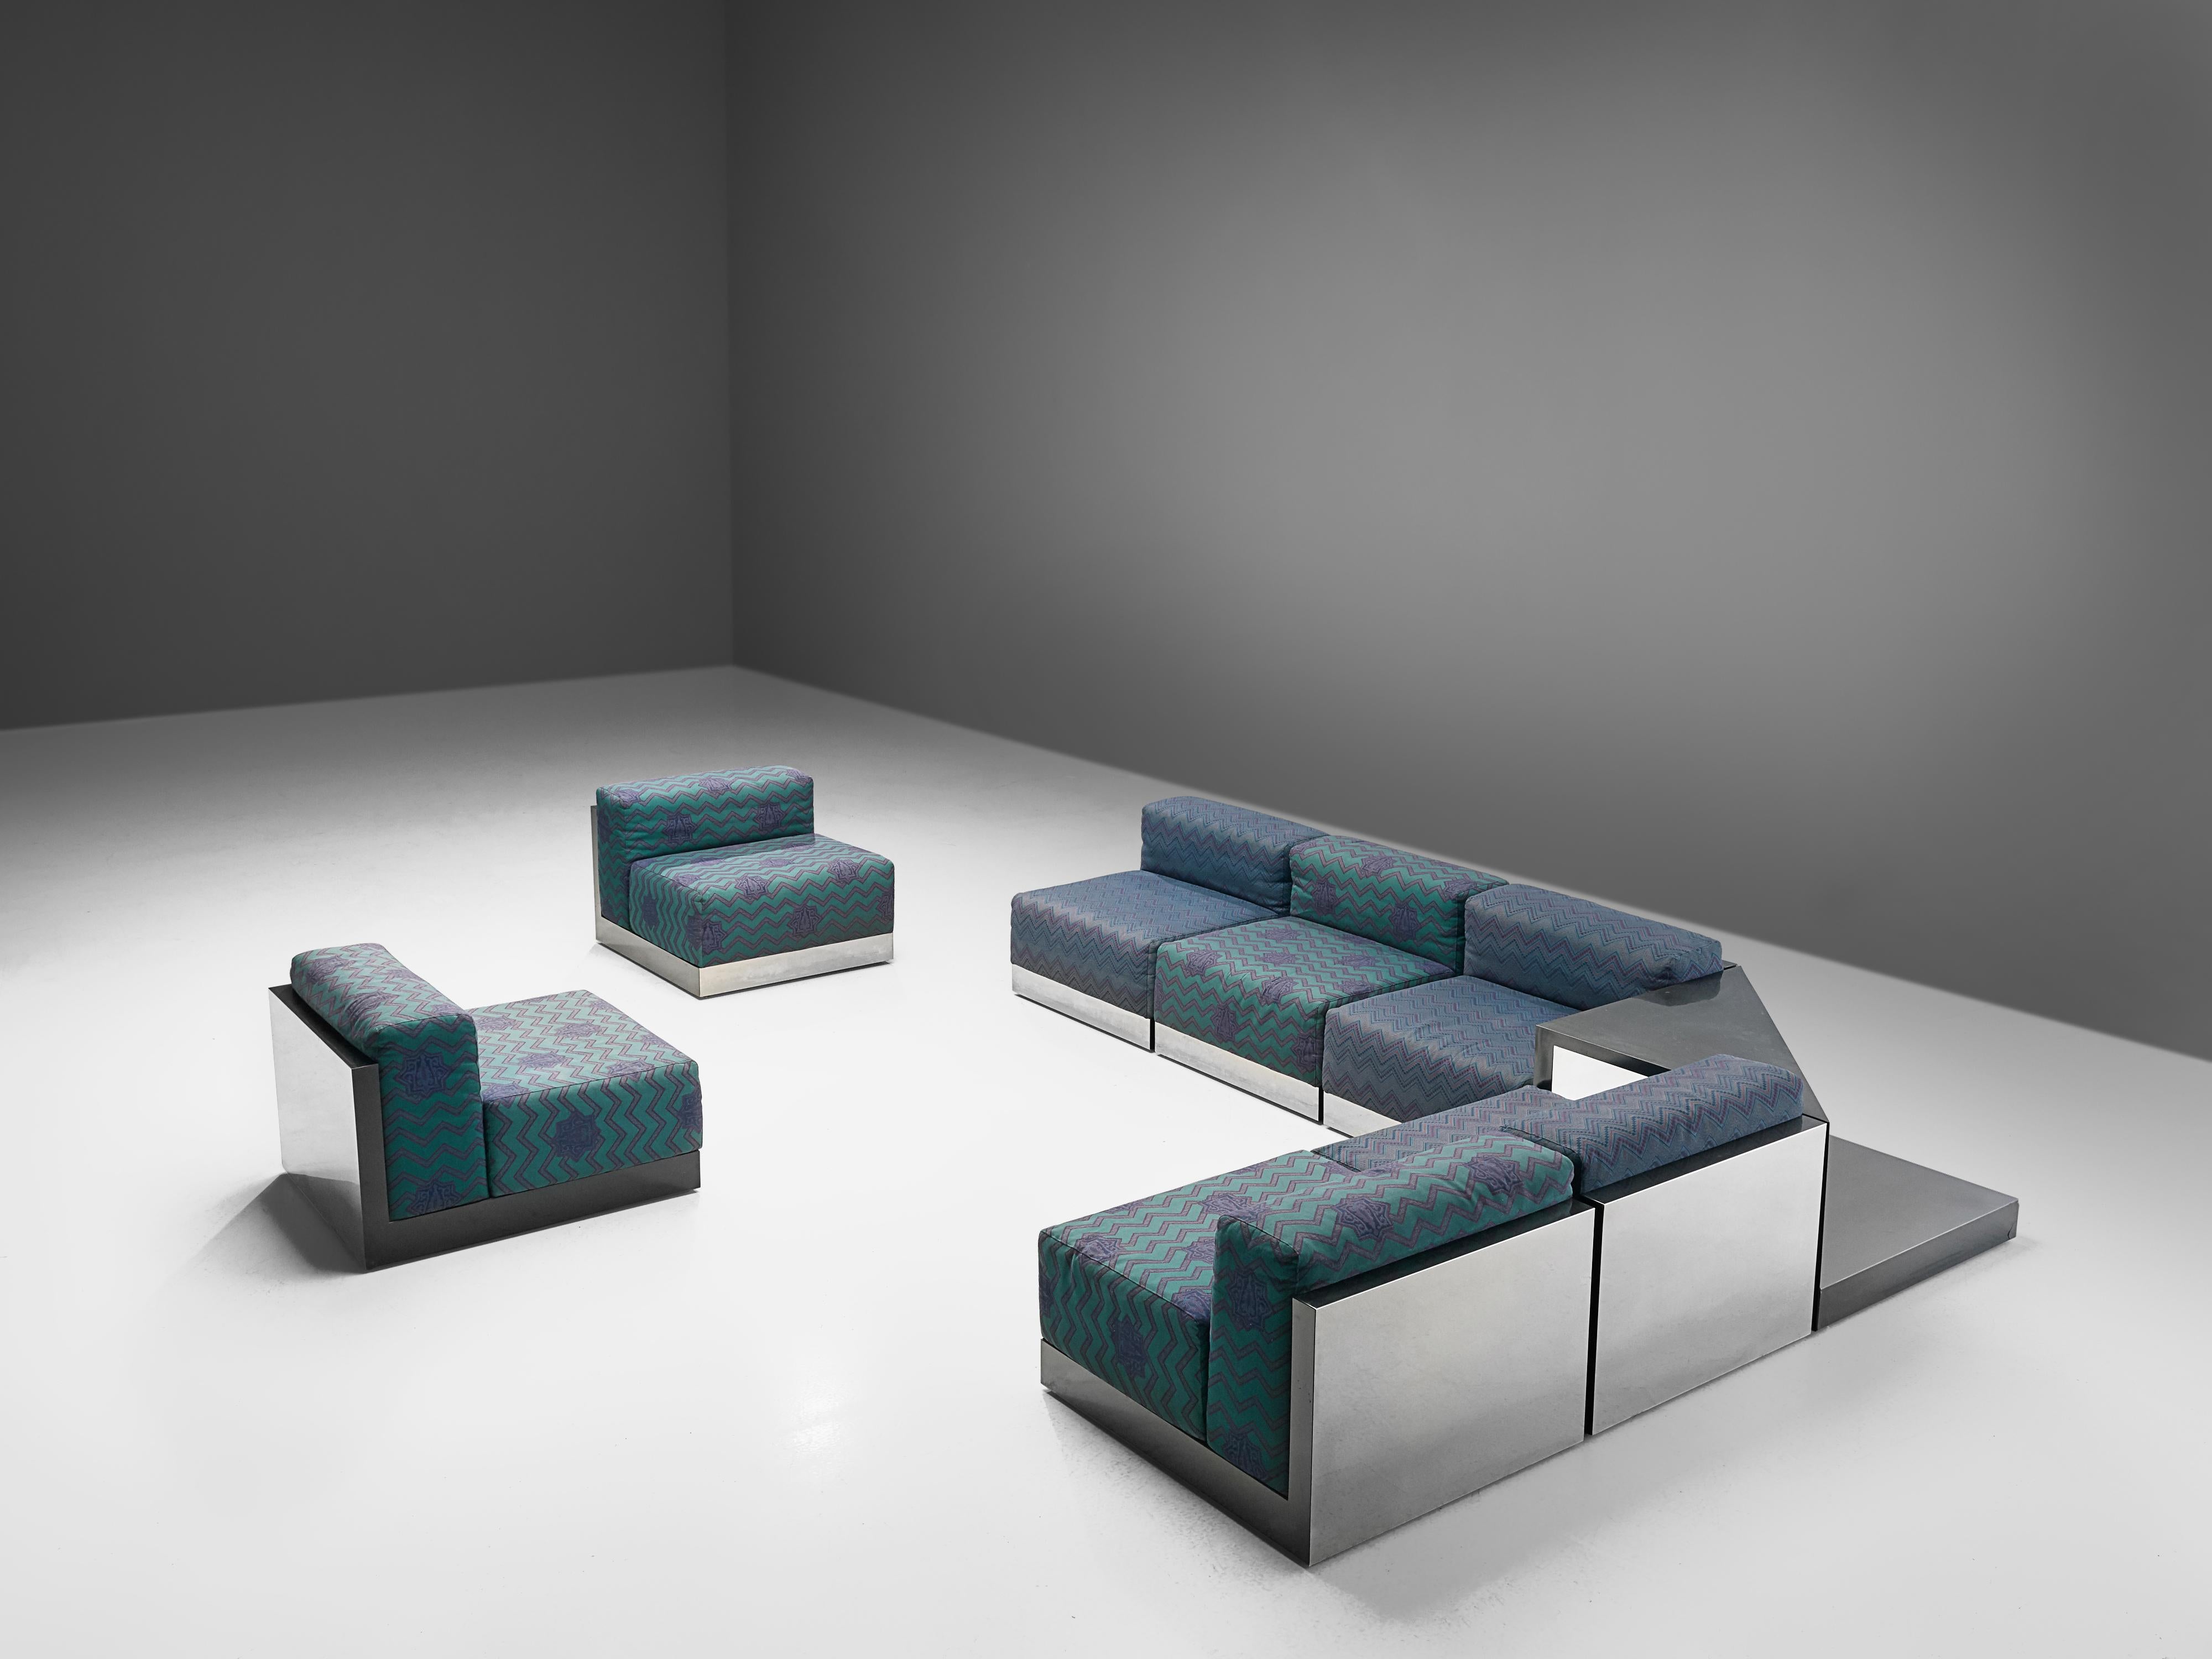 Sectional sofa, laminated wood, stainless steel, fabric, Italy, 1980s

A postmodern modular sofa consisting of seven seating elements and one corner element functioning as a side table. A perfect piece to place in a large space as it can be